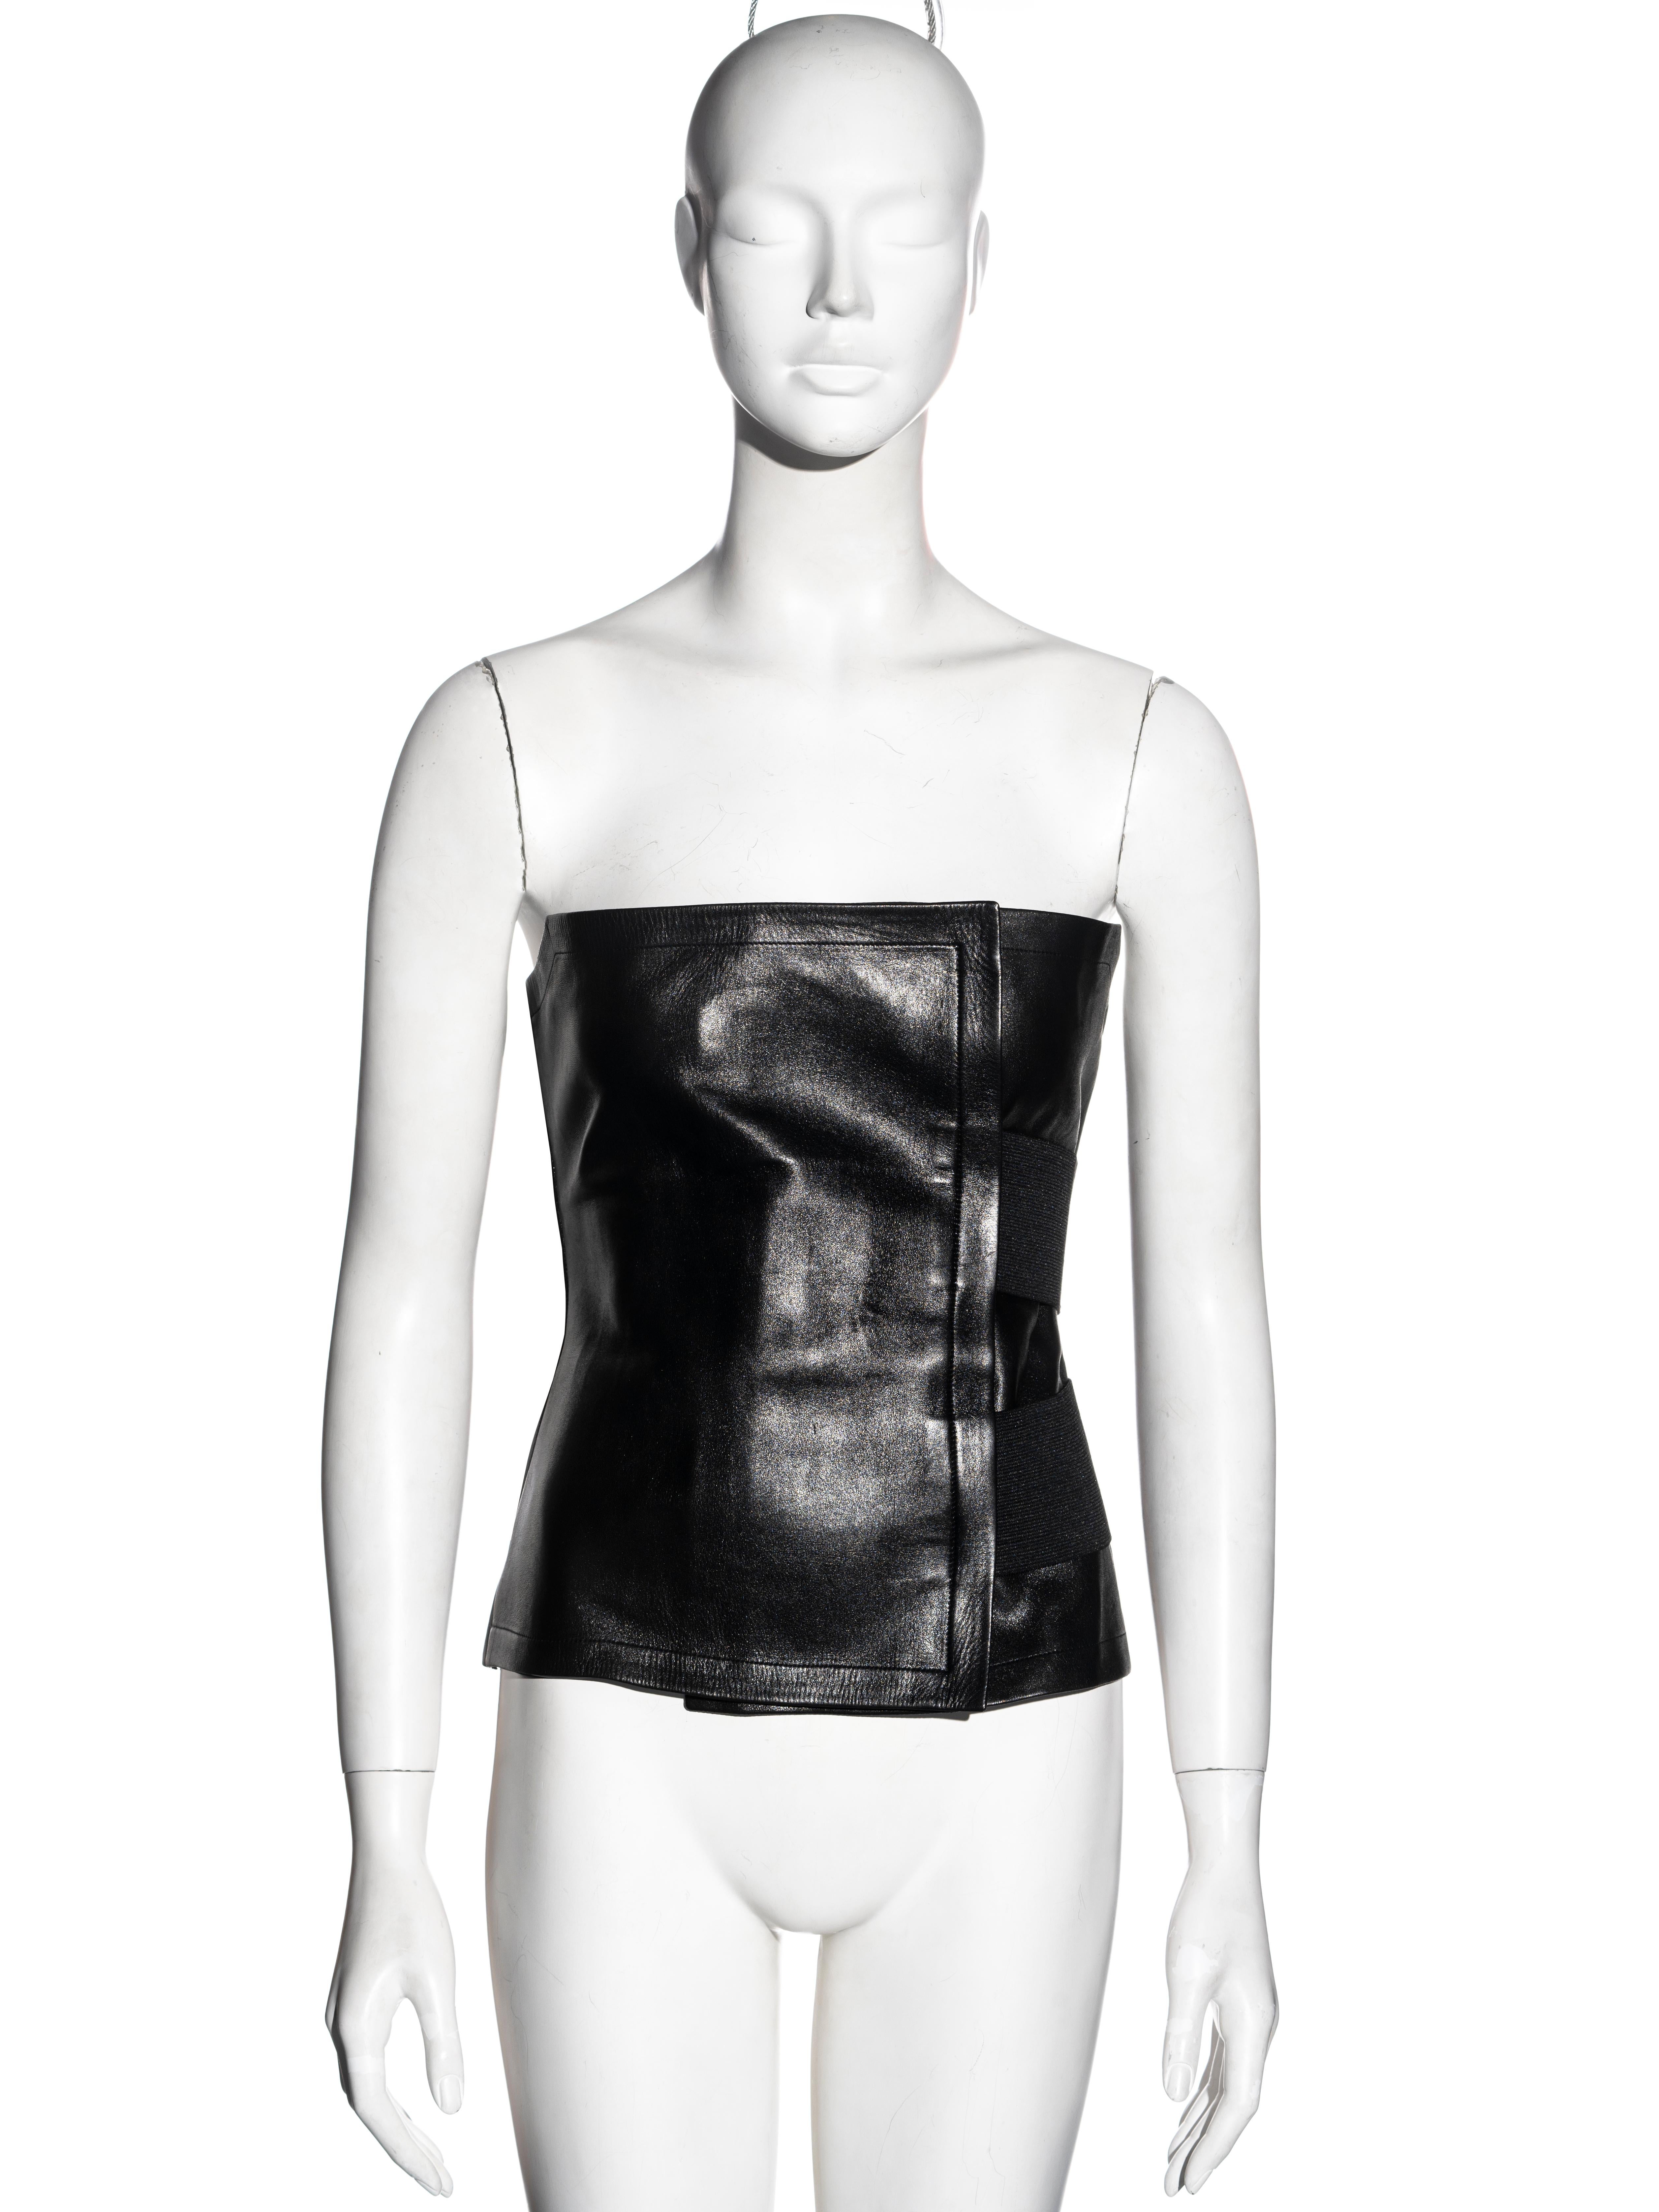 ▪ Yves Saint Laurent strapless wrap corset 
▪ Designed by Tom Ford
▪ Black Leather
▪ Two large elastic bands 
▪ FR 38 - UK 10 - US 6
▪ Spring-Summer 2001
▪ 100% Leather
▪ Made in Italy